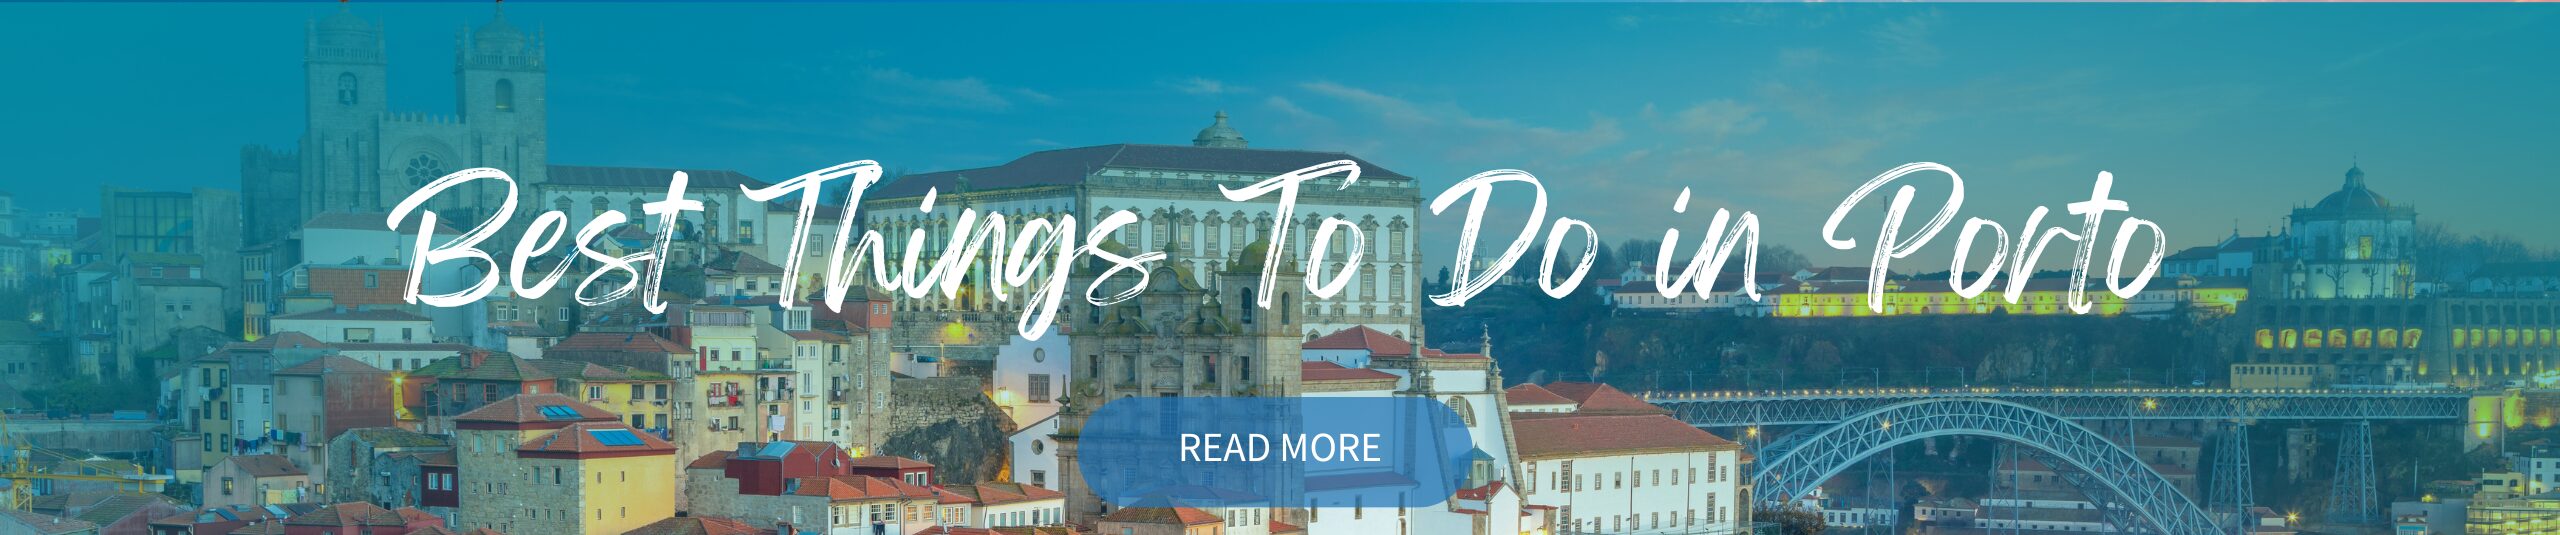 Best Things To Do in Porto Web Banner